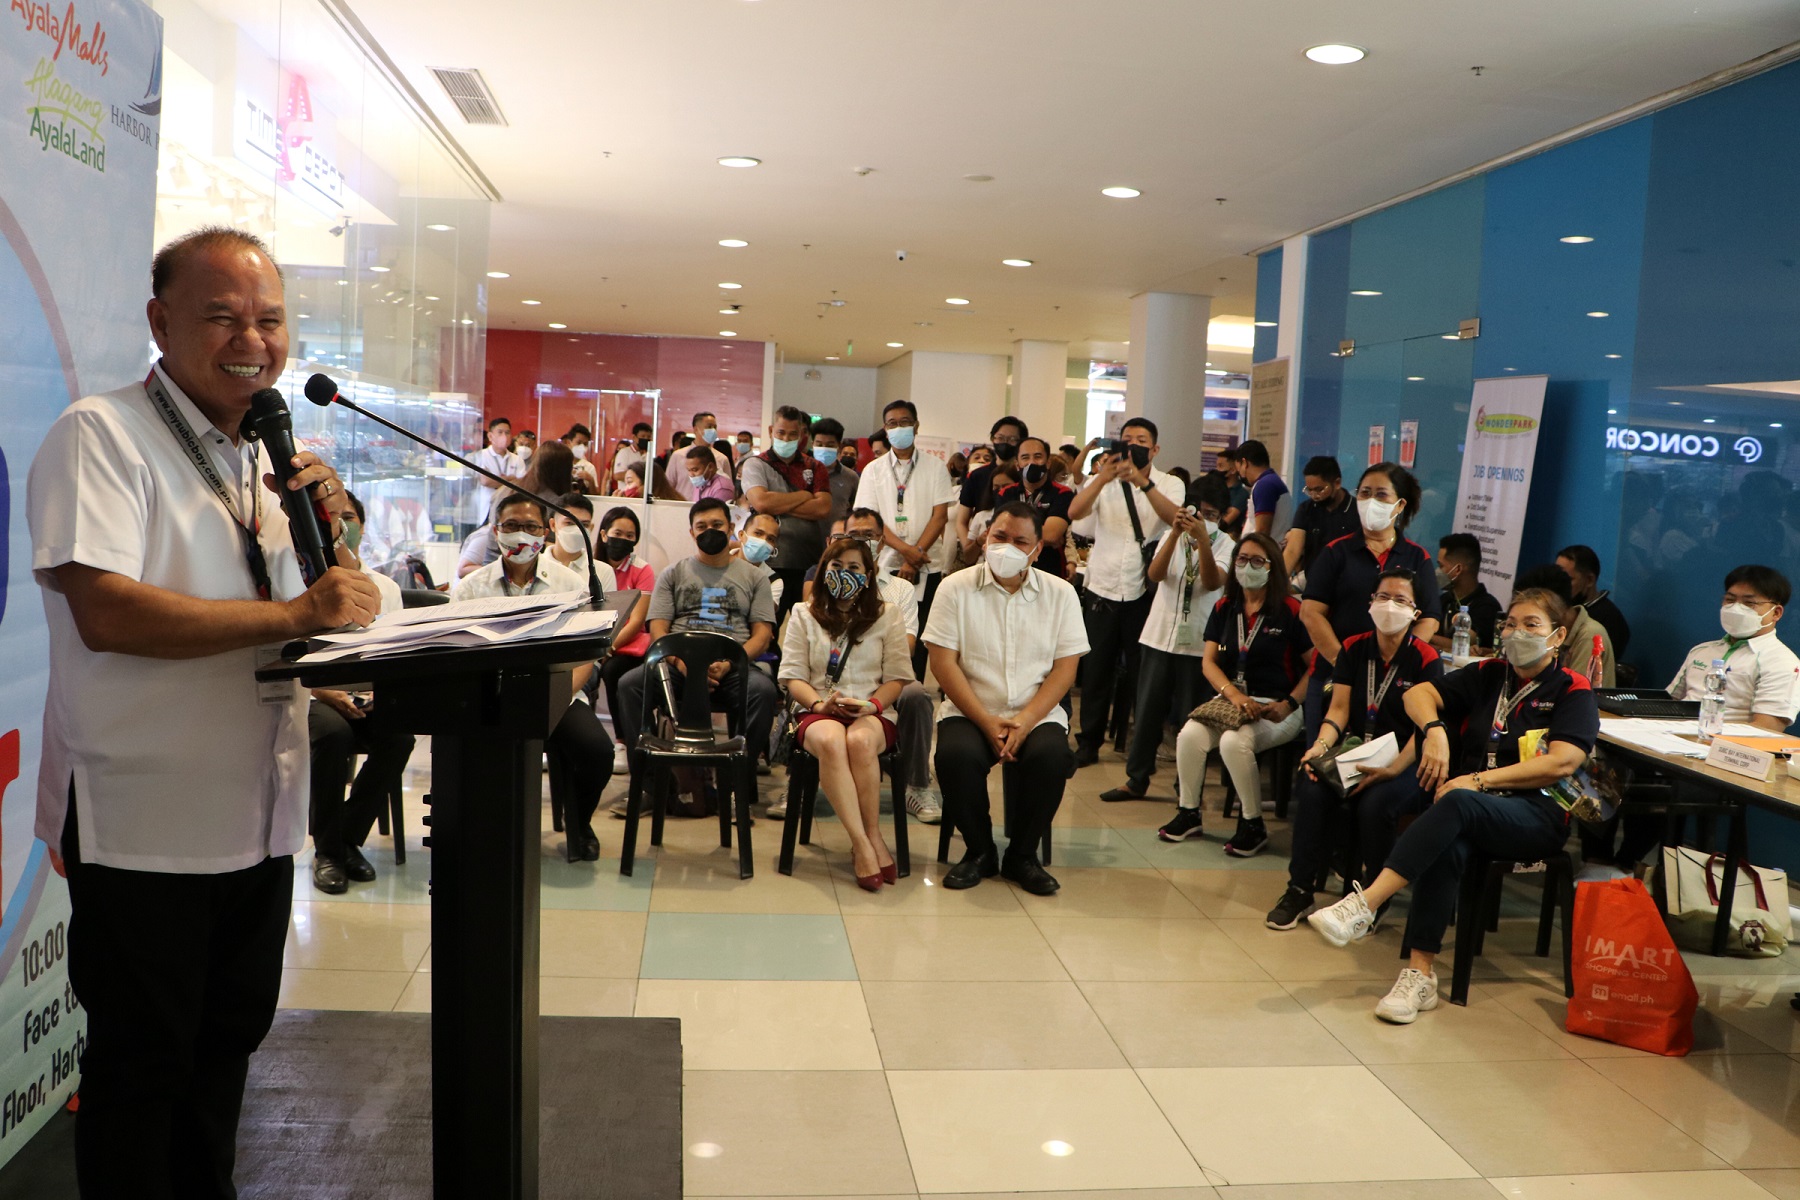 SBMA Chairman and Administrator Rolen C.  Paulino formally opens the Labor department’s first face-to-face job fair at the Ayala Harbor Point Mall after a two-year break because of the Covid-19 pandemic.